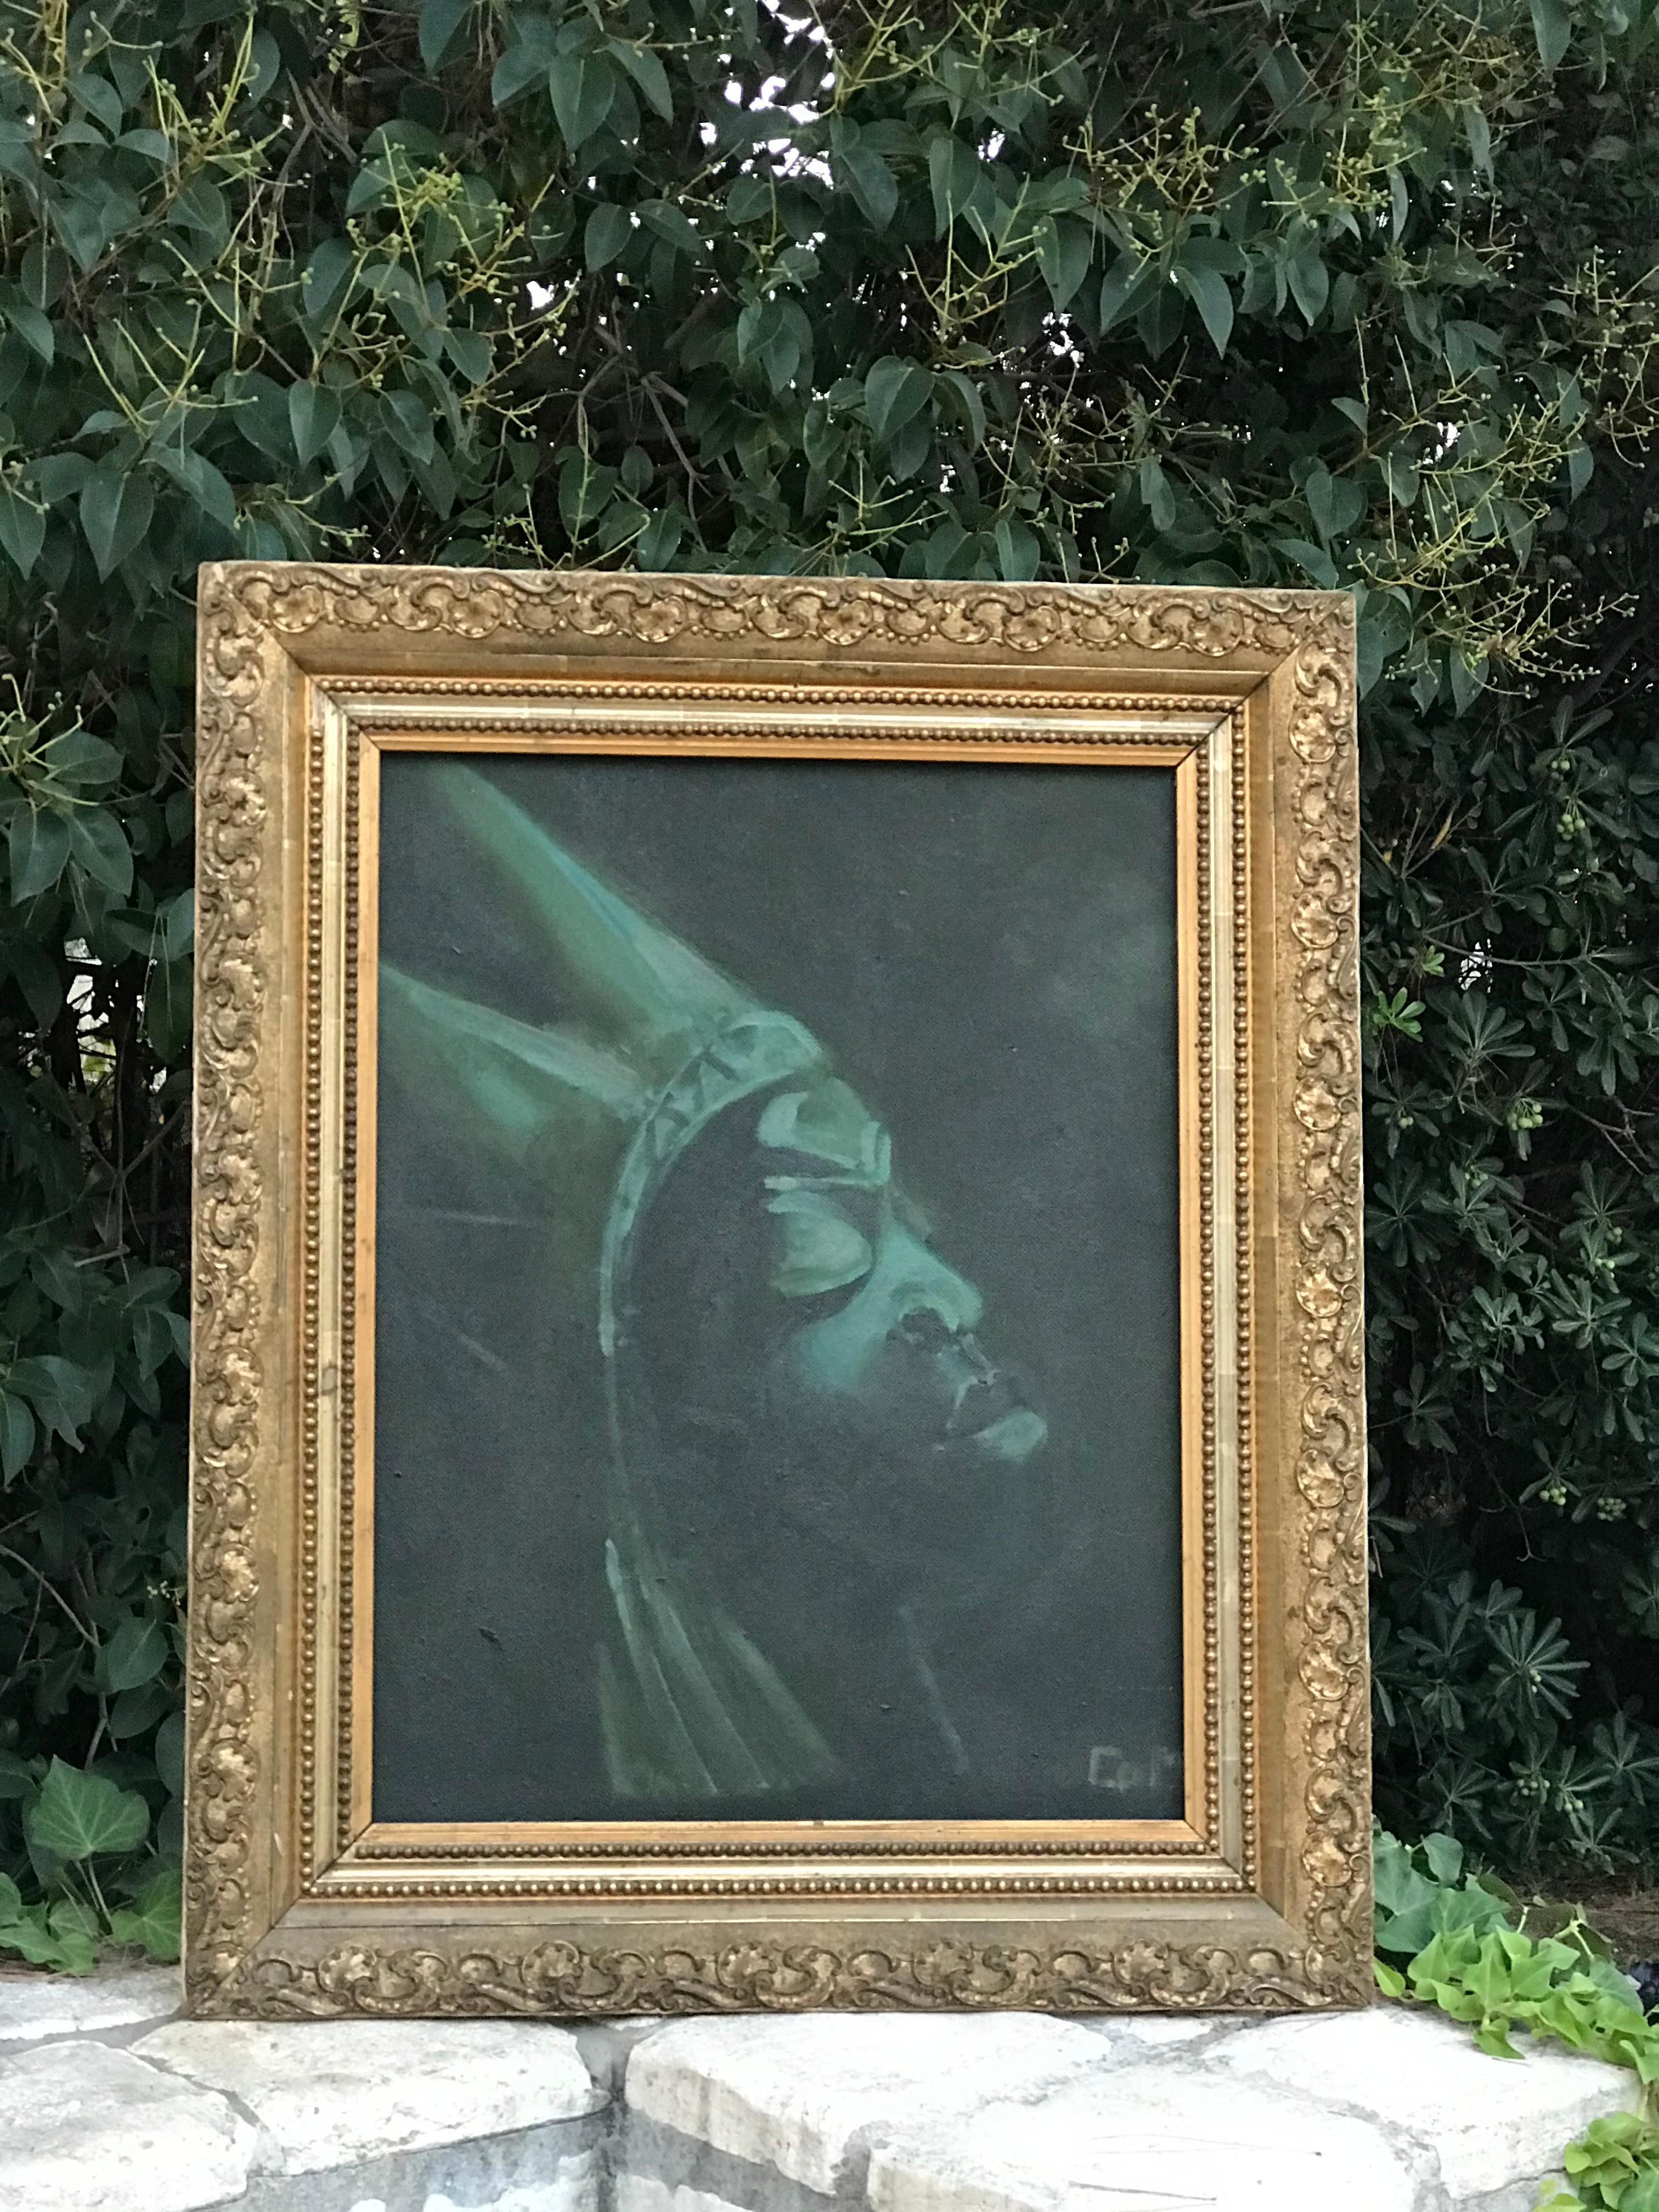 With an Antique Golden Frame, Acrylic on a Fiberboard, signed by the artist